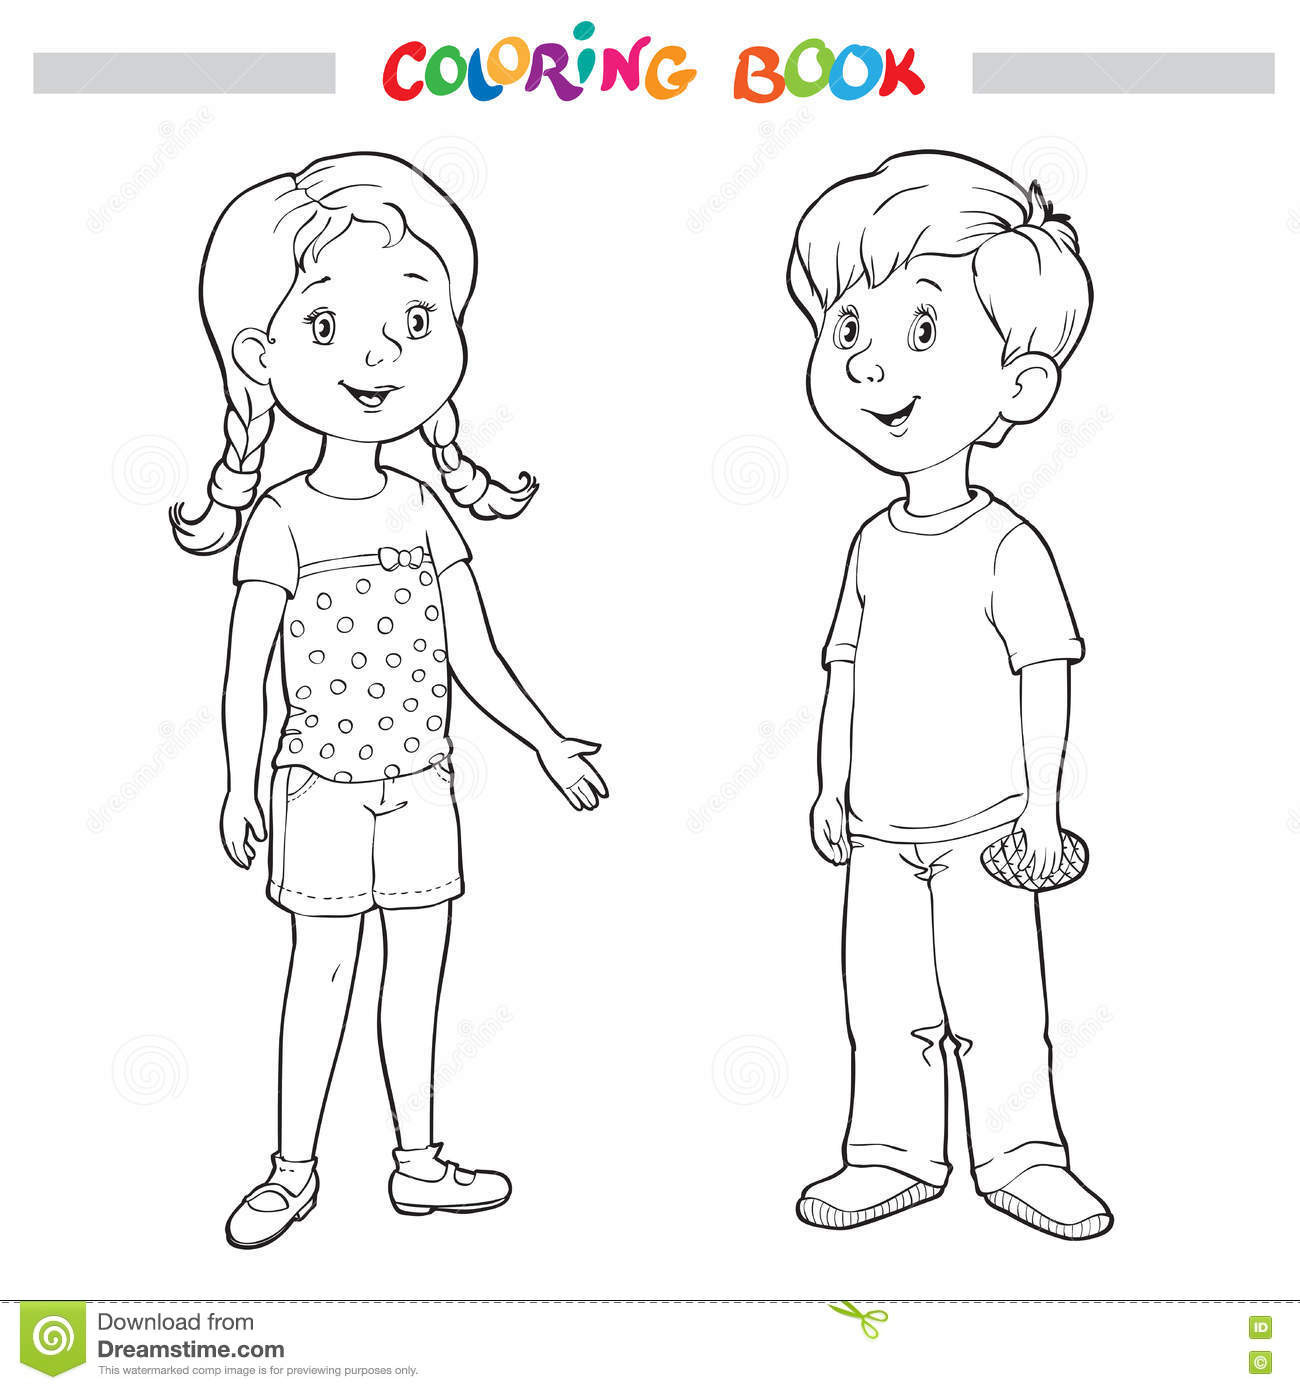 Coloring Pages Of Boys And Girls
 Coloring Book Page Boy And Girl Stock Vector